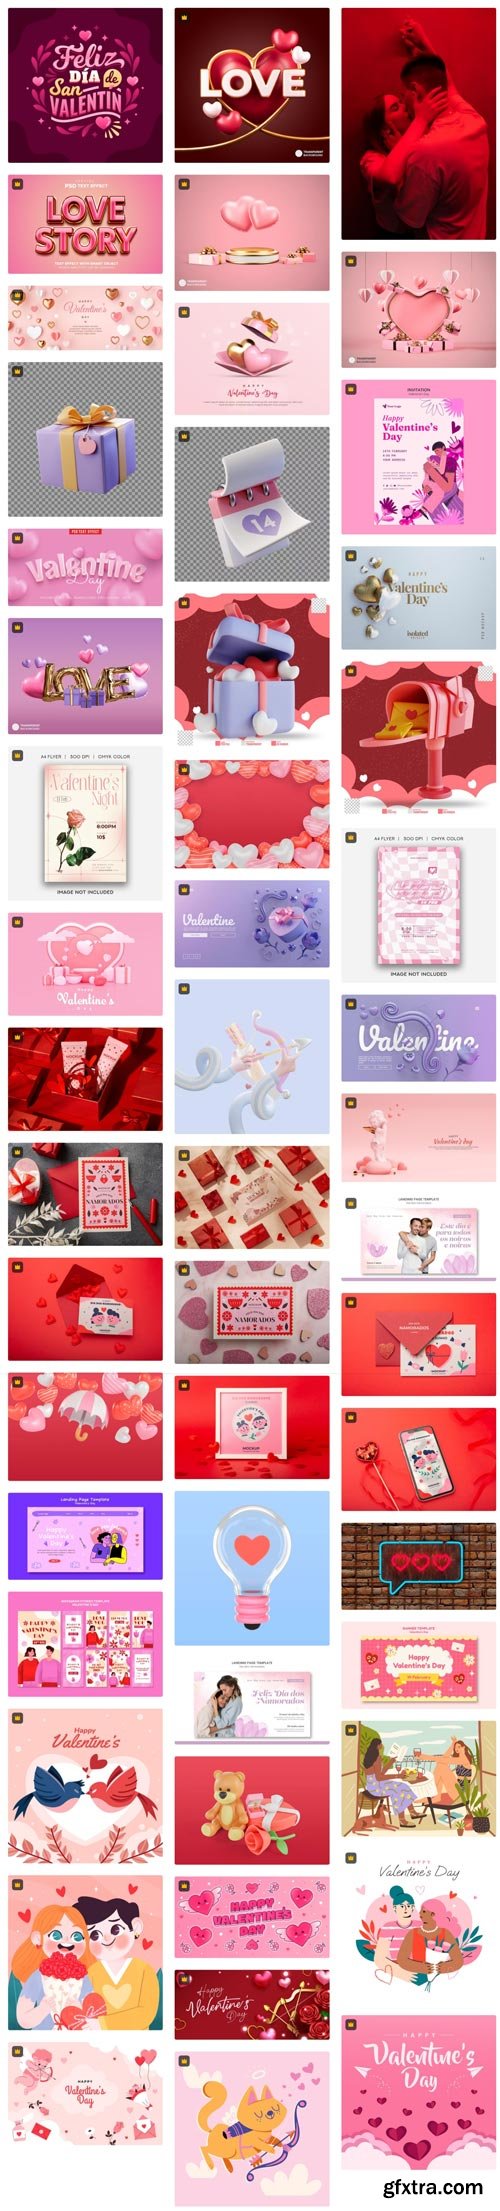 Premium Vector Collections - Love is in the air - 150xEPS and JPG